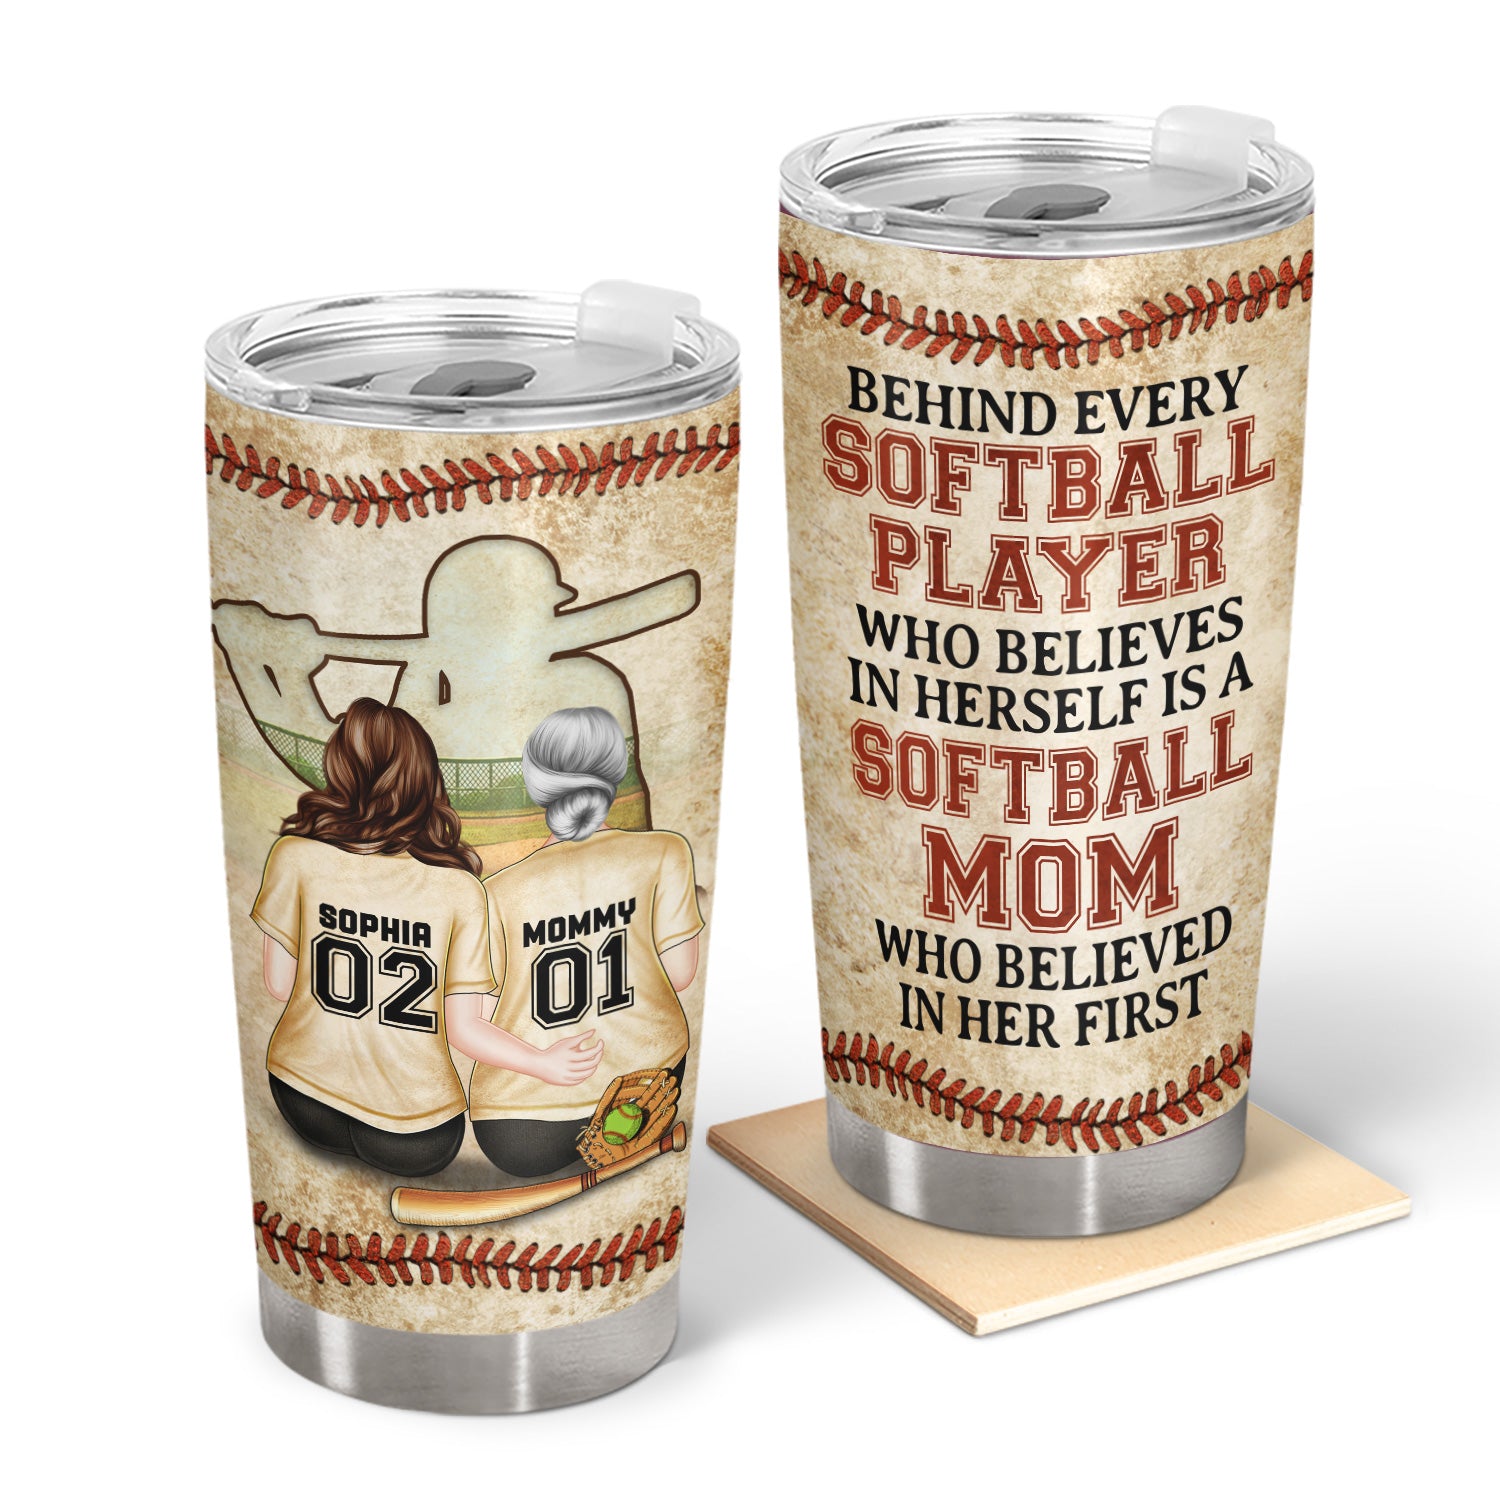 Every Softball Player Who Believes In Old Mom - Birthday, Loving Gift For Sport Fan, Mom, Mother - Personalized Custom Tumbler